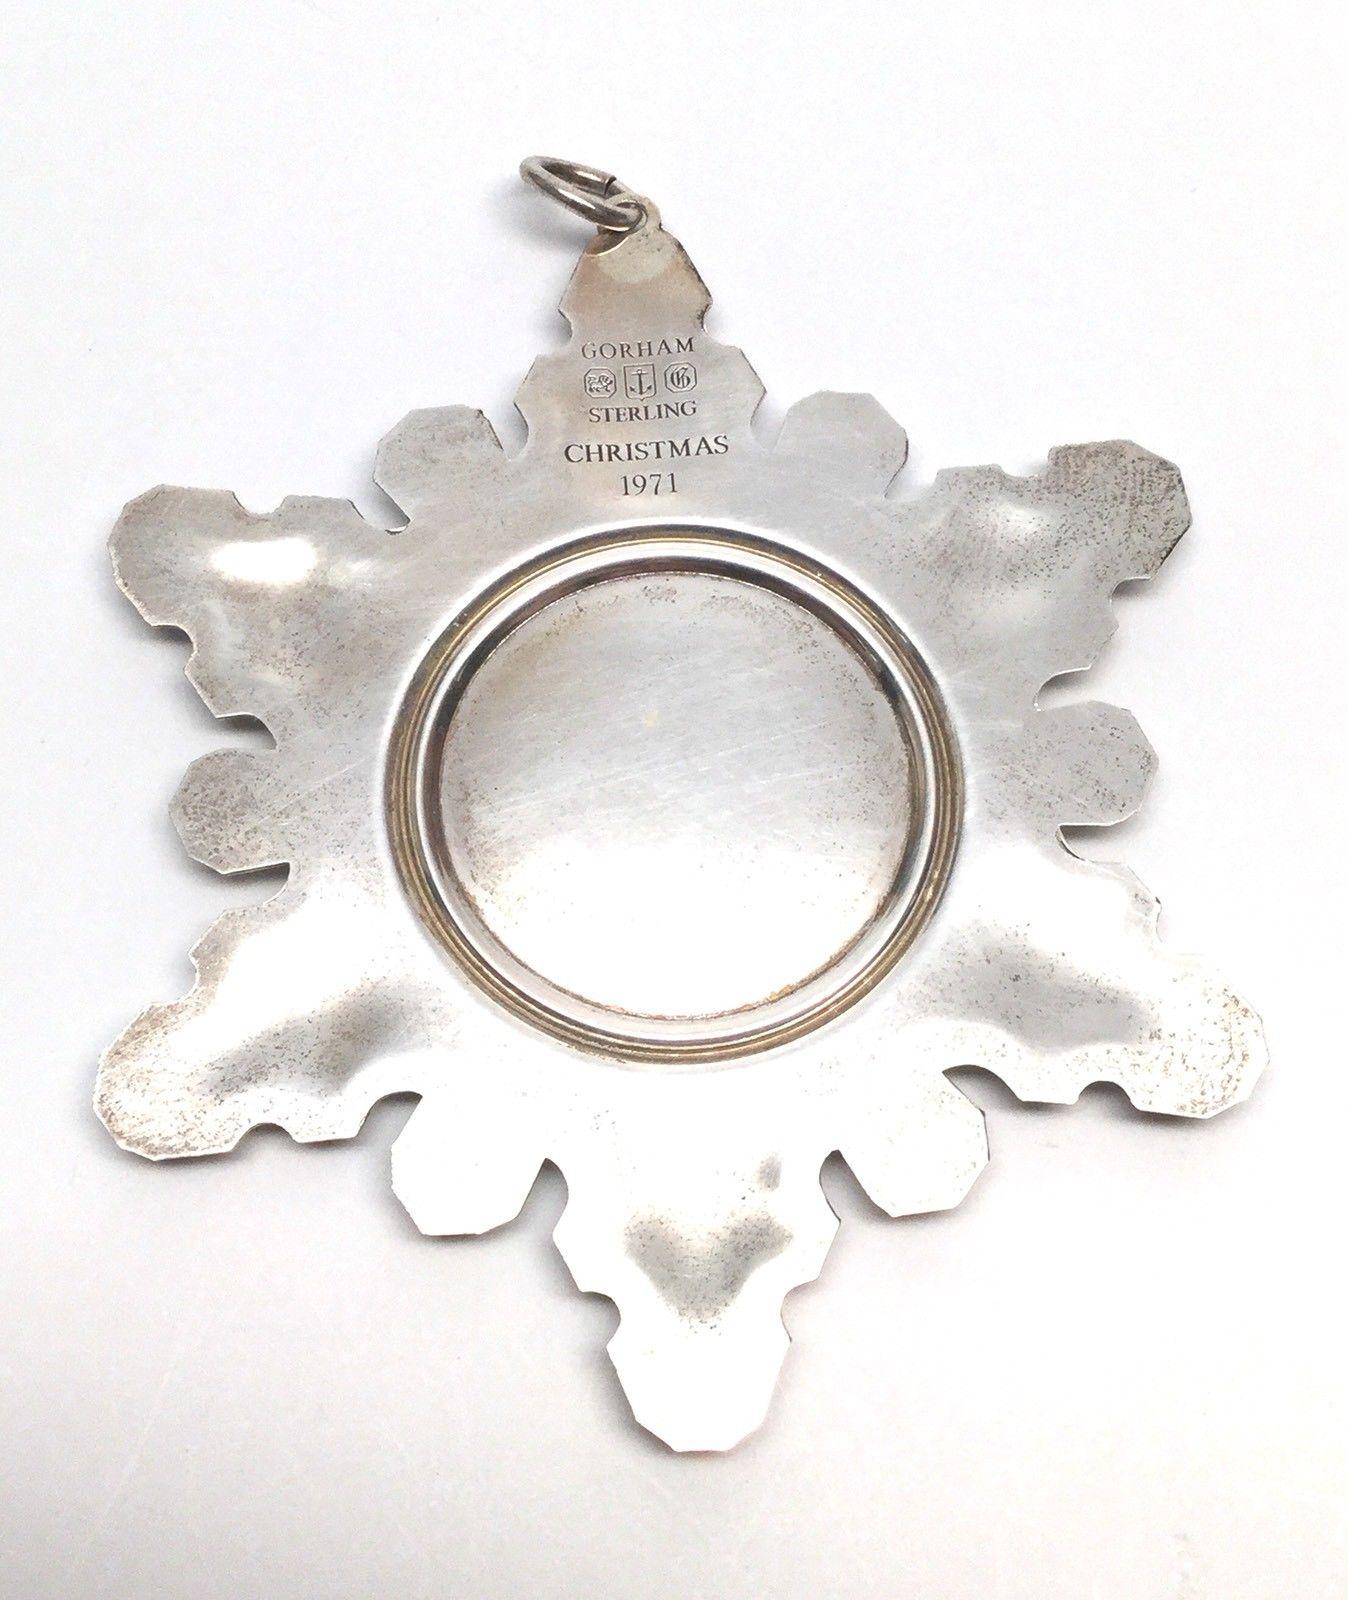 American 1971 Gorham Sterling Silver Christmas Ornament